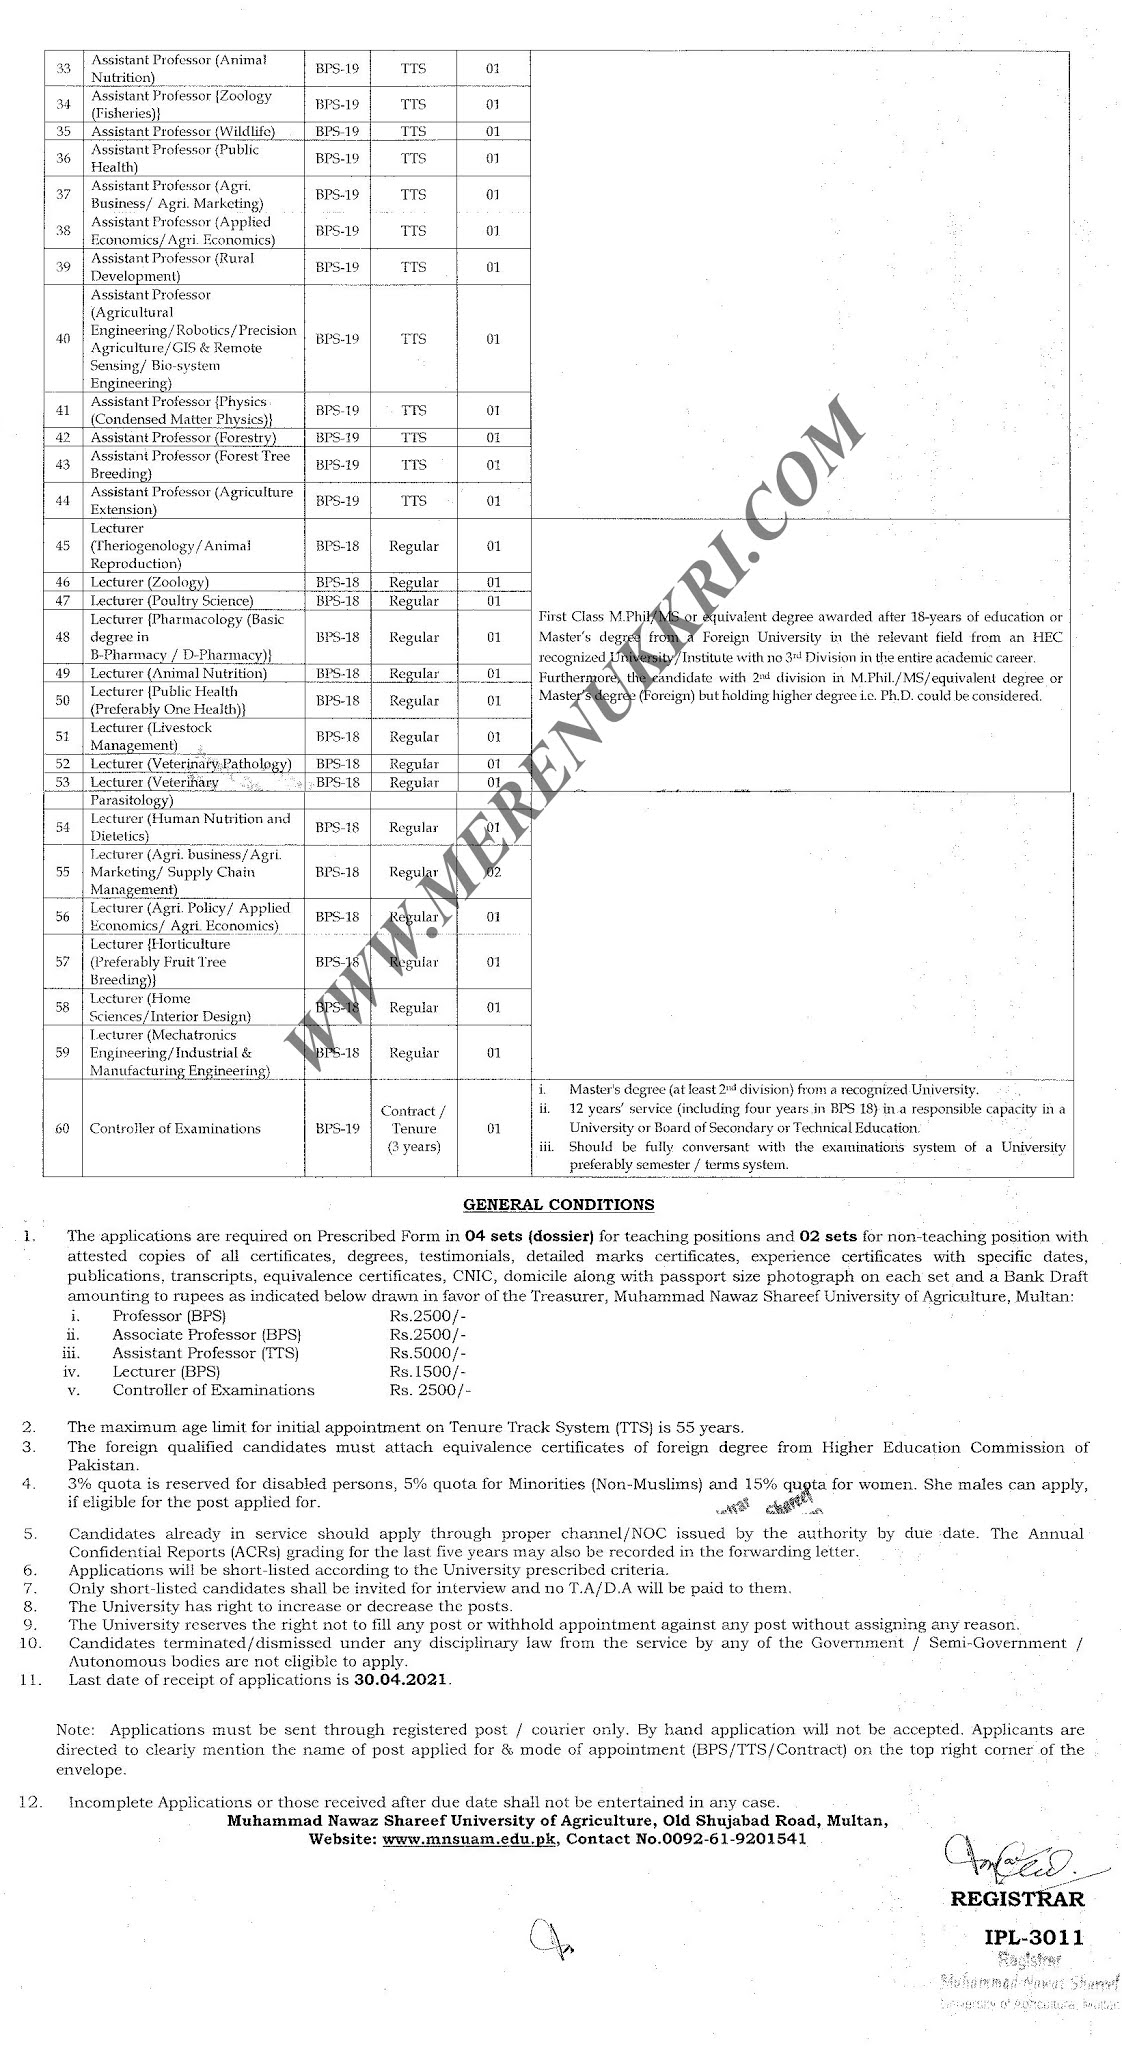 Latest Jobs in MNSUAM | Muhammad Nawaz Shareef University of Agriculture, Multan | Download Application Form